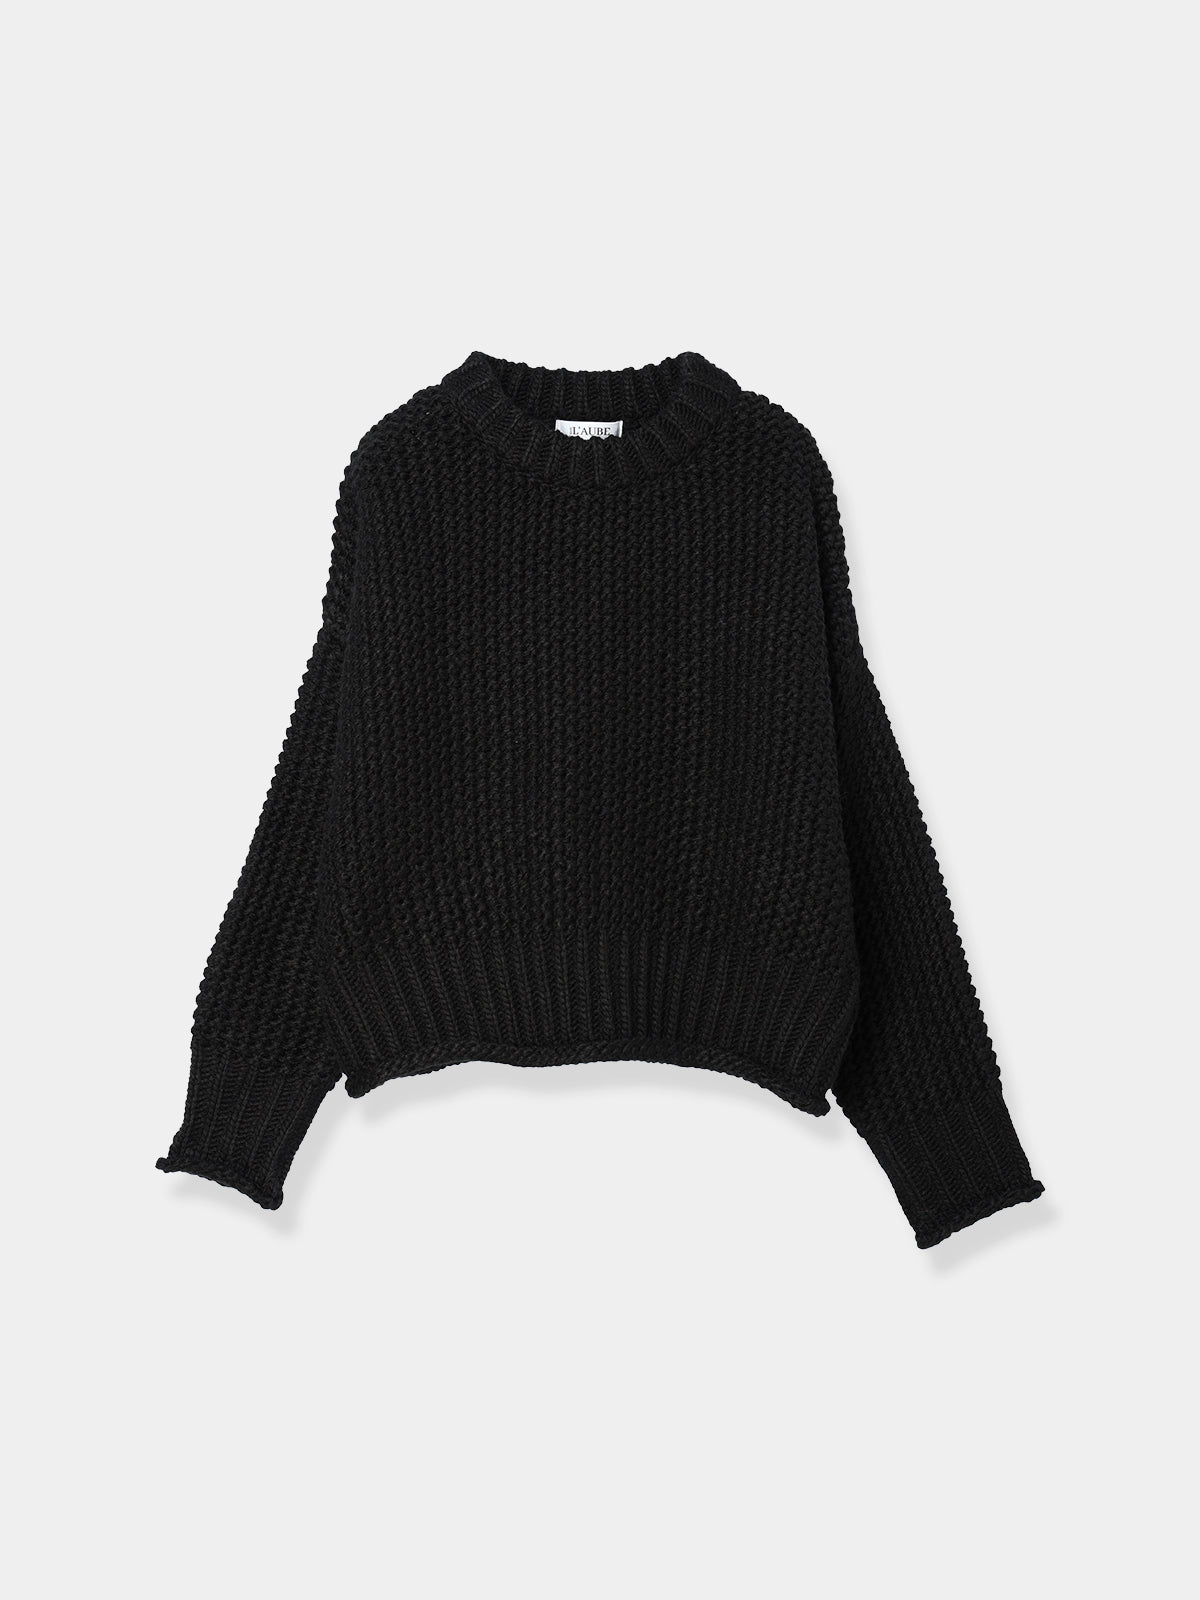 Cropped knit tops